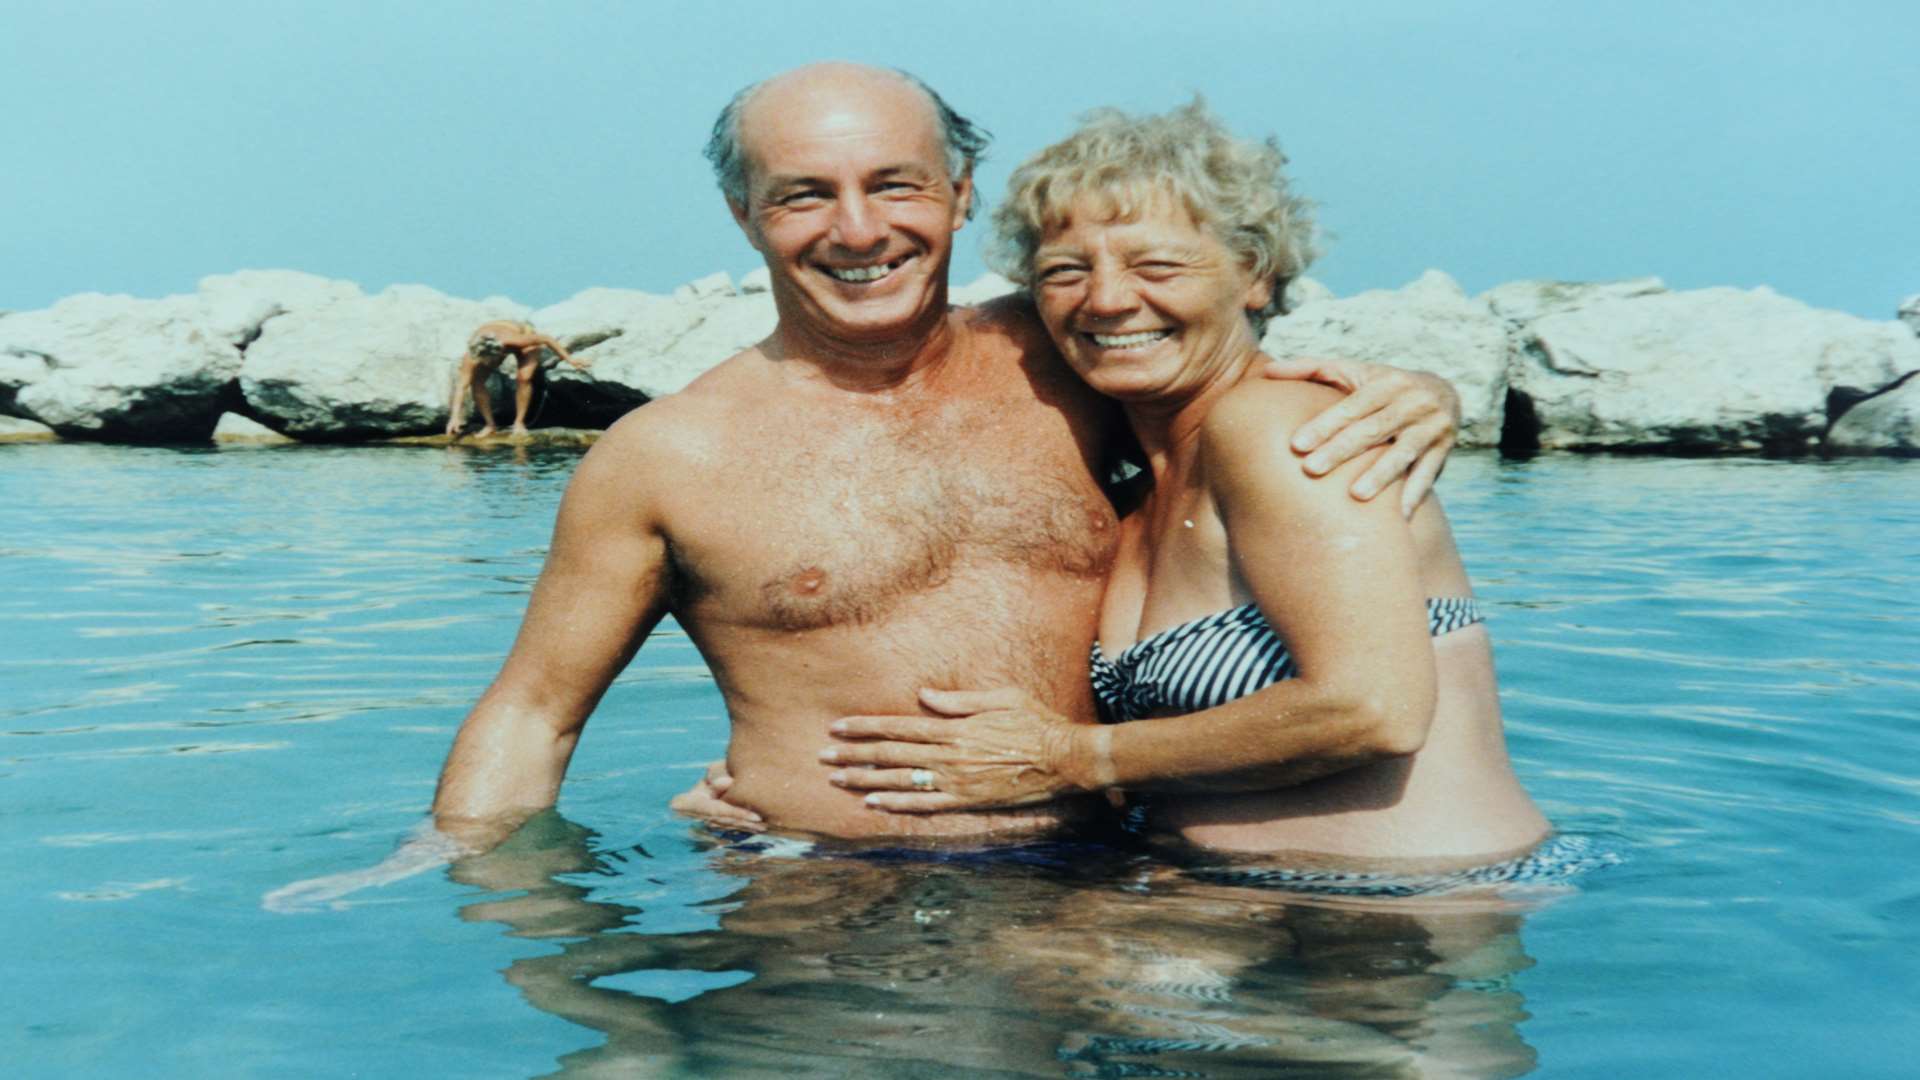 With his wife Patricia on holiday in Italy in the 1980's.